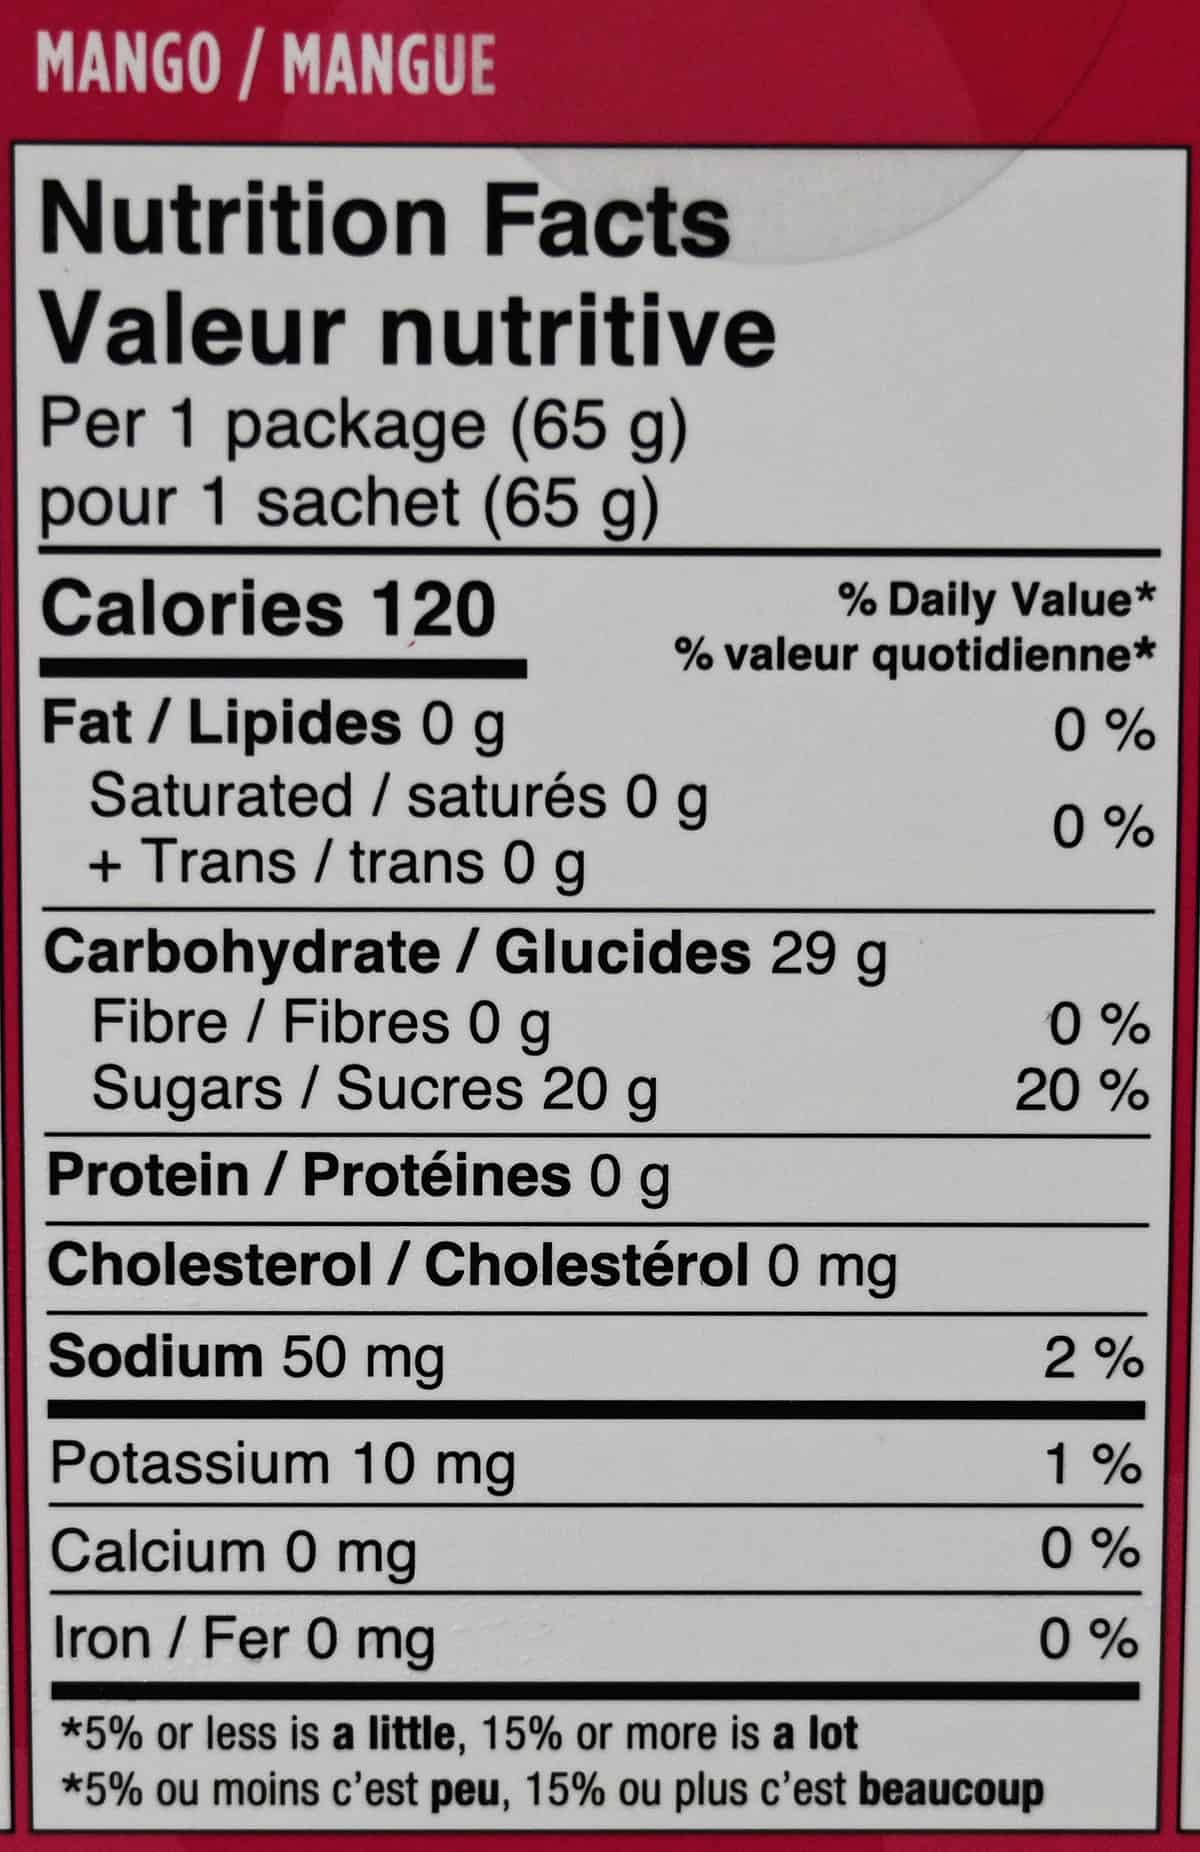 Image of the mango boba nutrition facts from the back of the box.